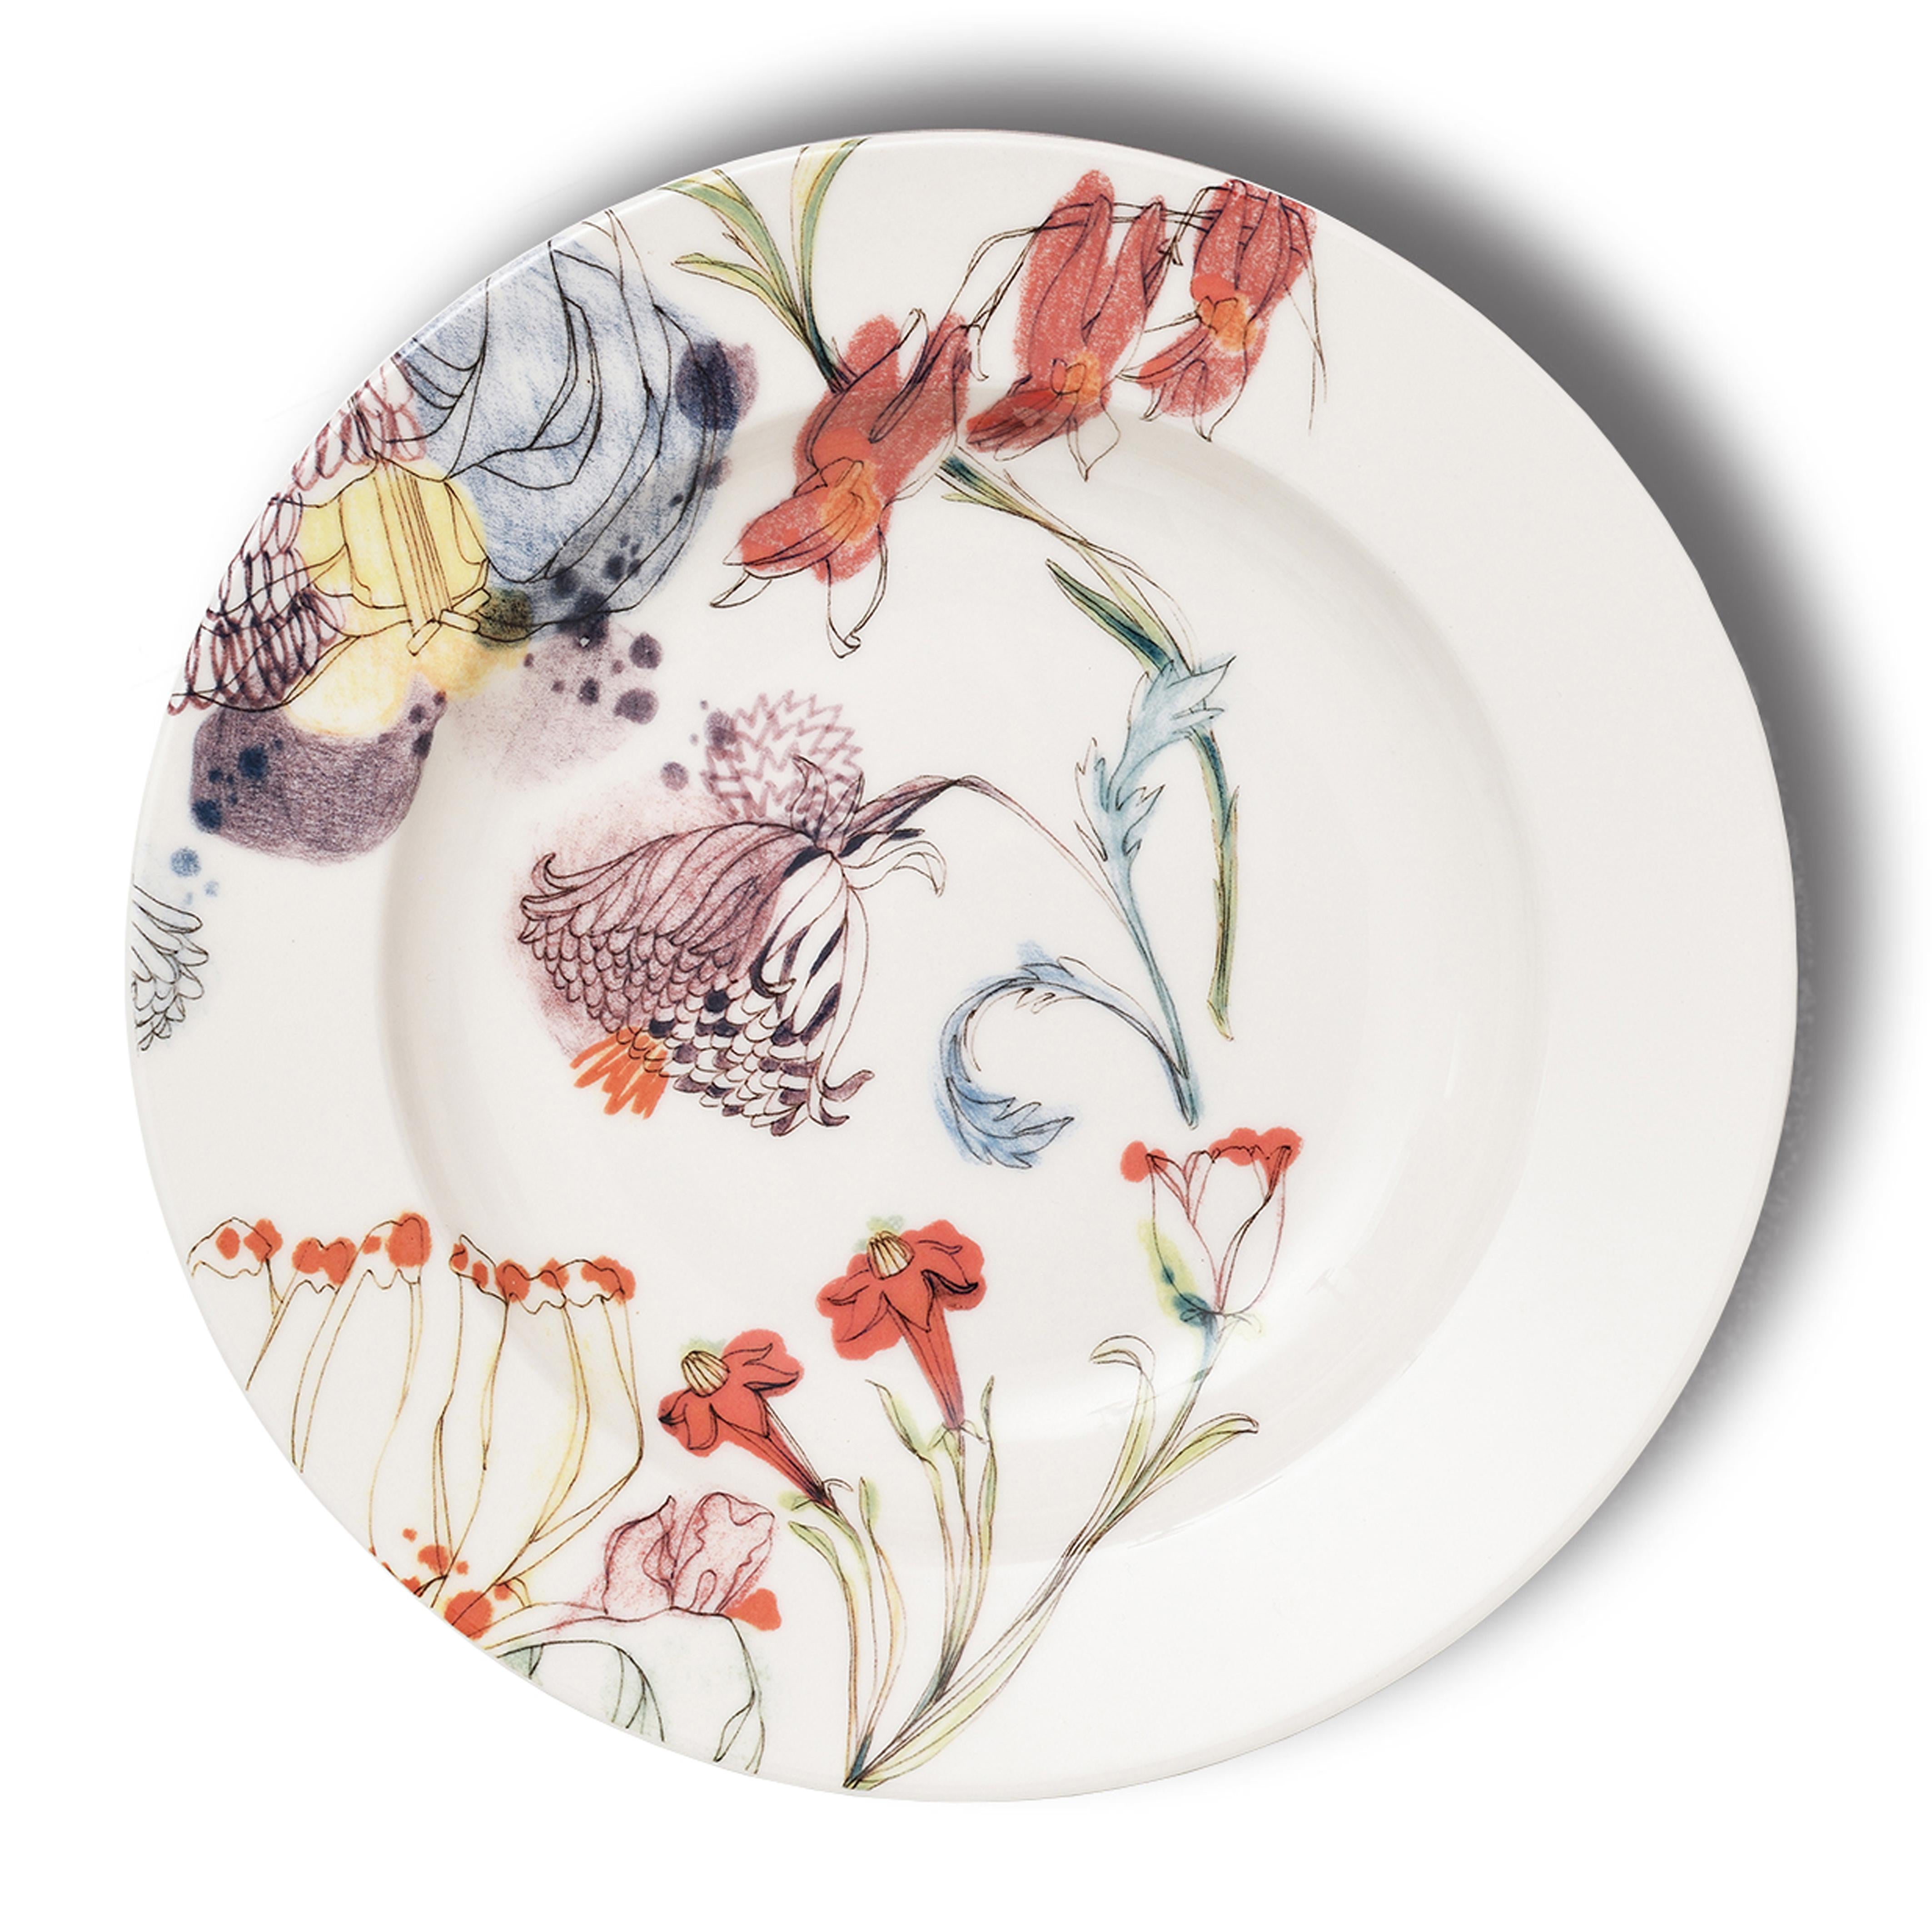 If you are looking for an unique tableware in order to make your dinner special and chic every day, this 